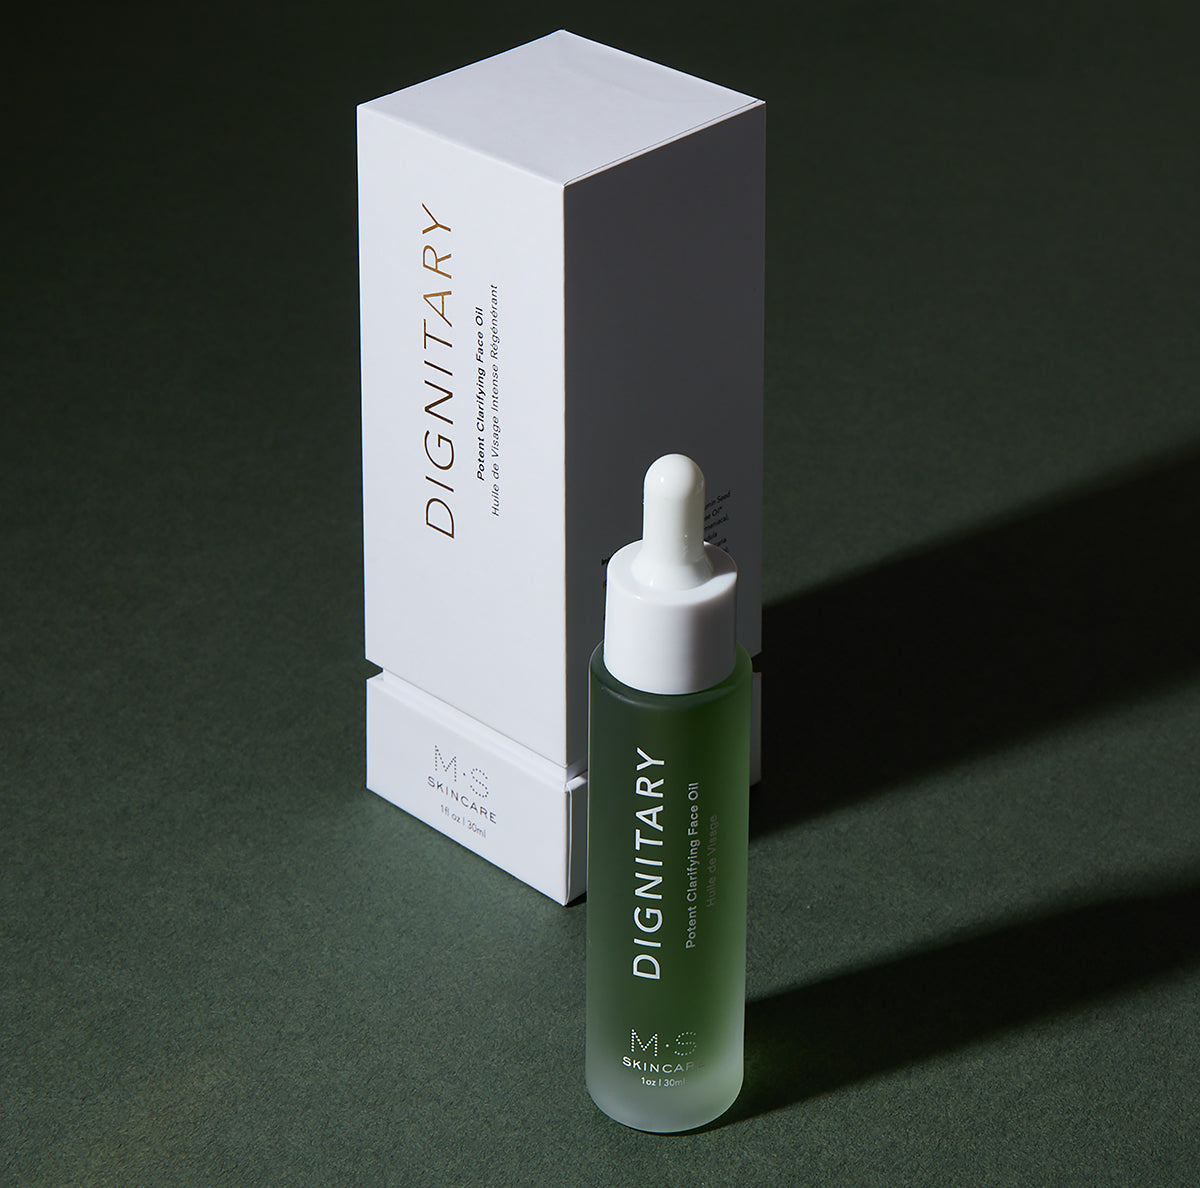 DIGNITARY | Clarifying Face Oil by Mullein and Sparrow